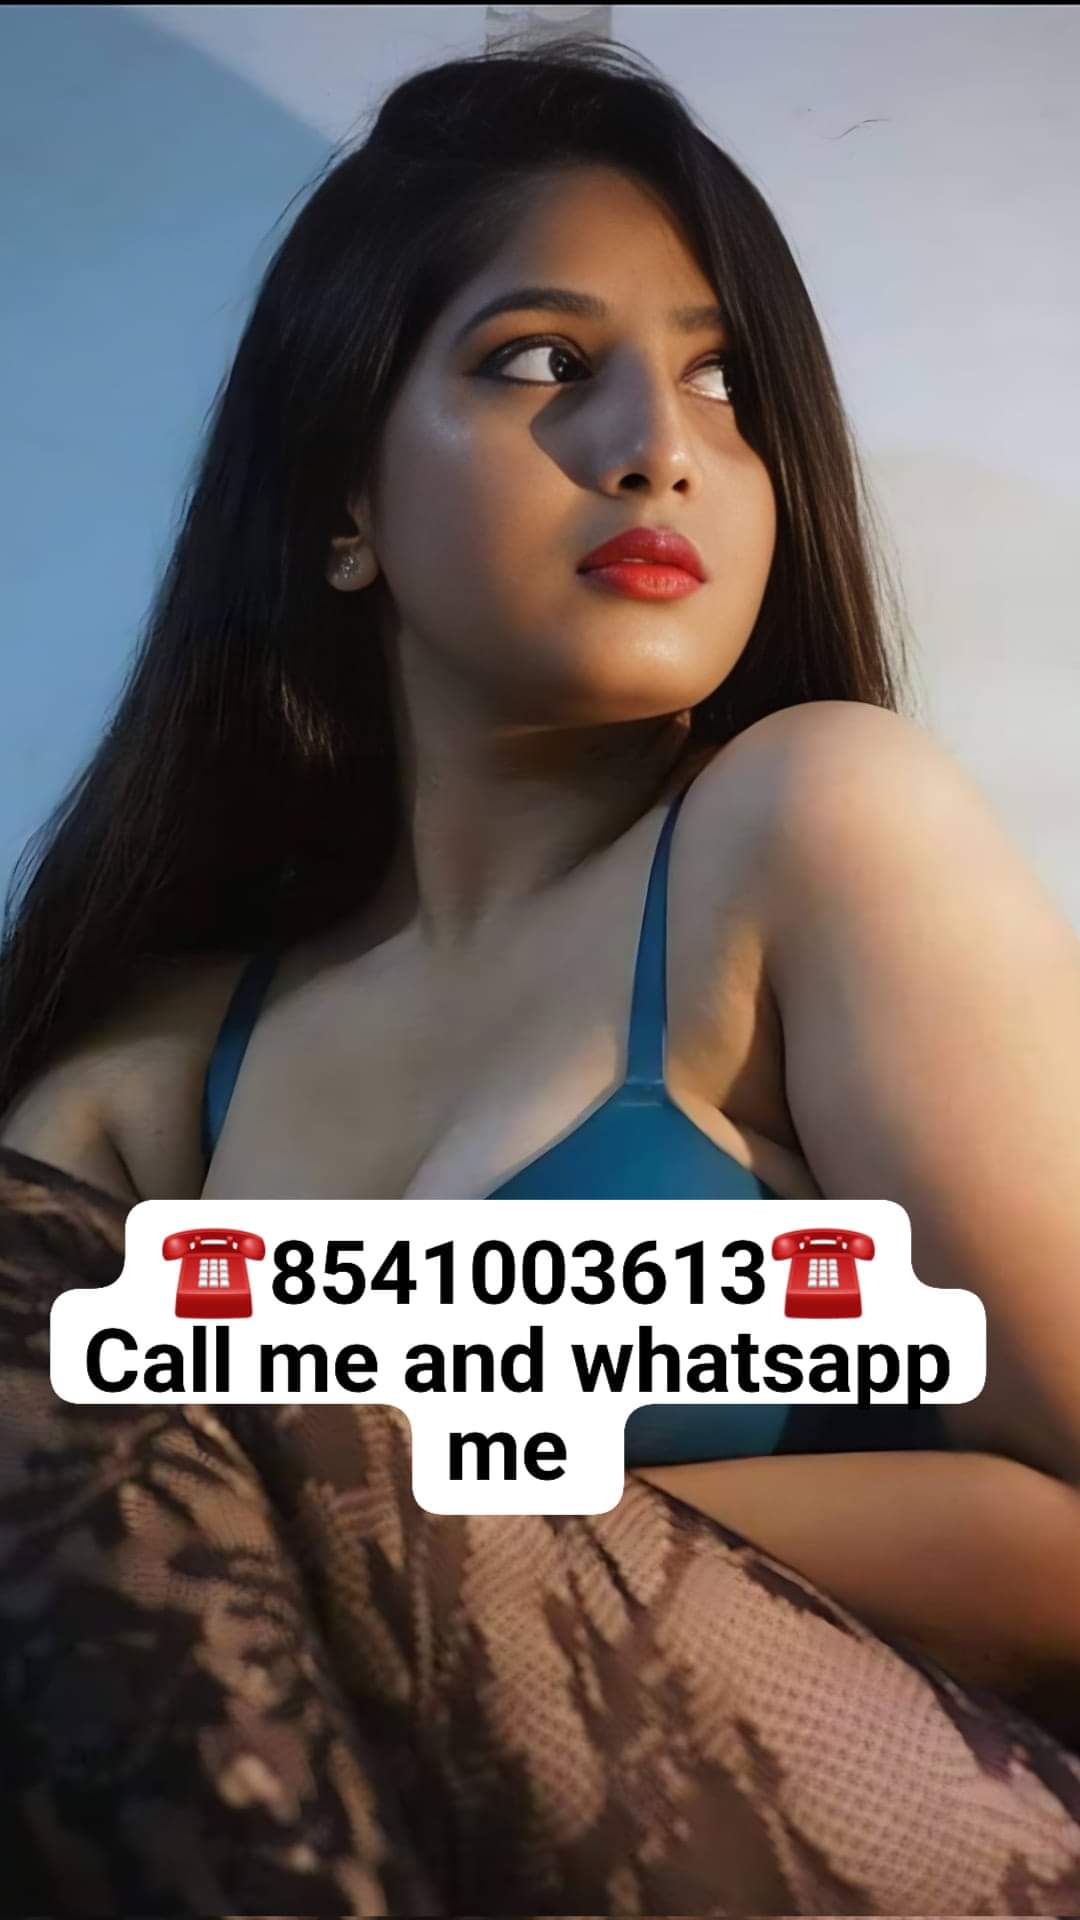 Panvel call girls available hot and sexy college girls